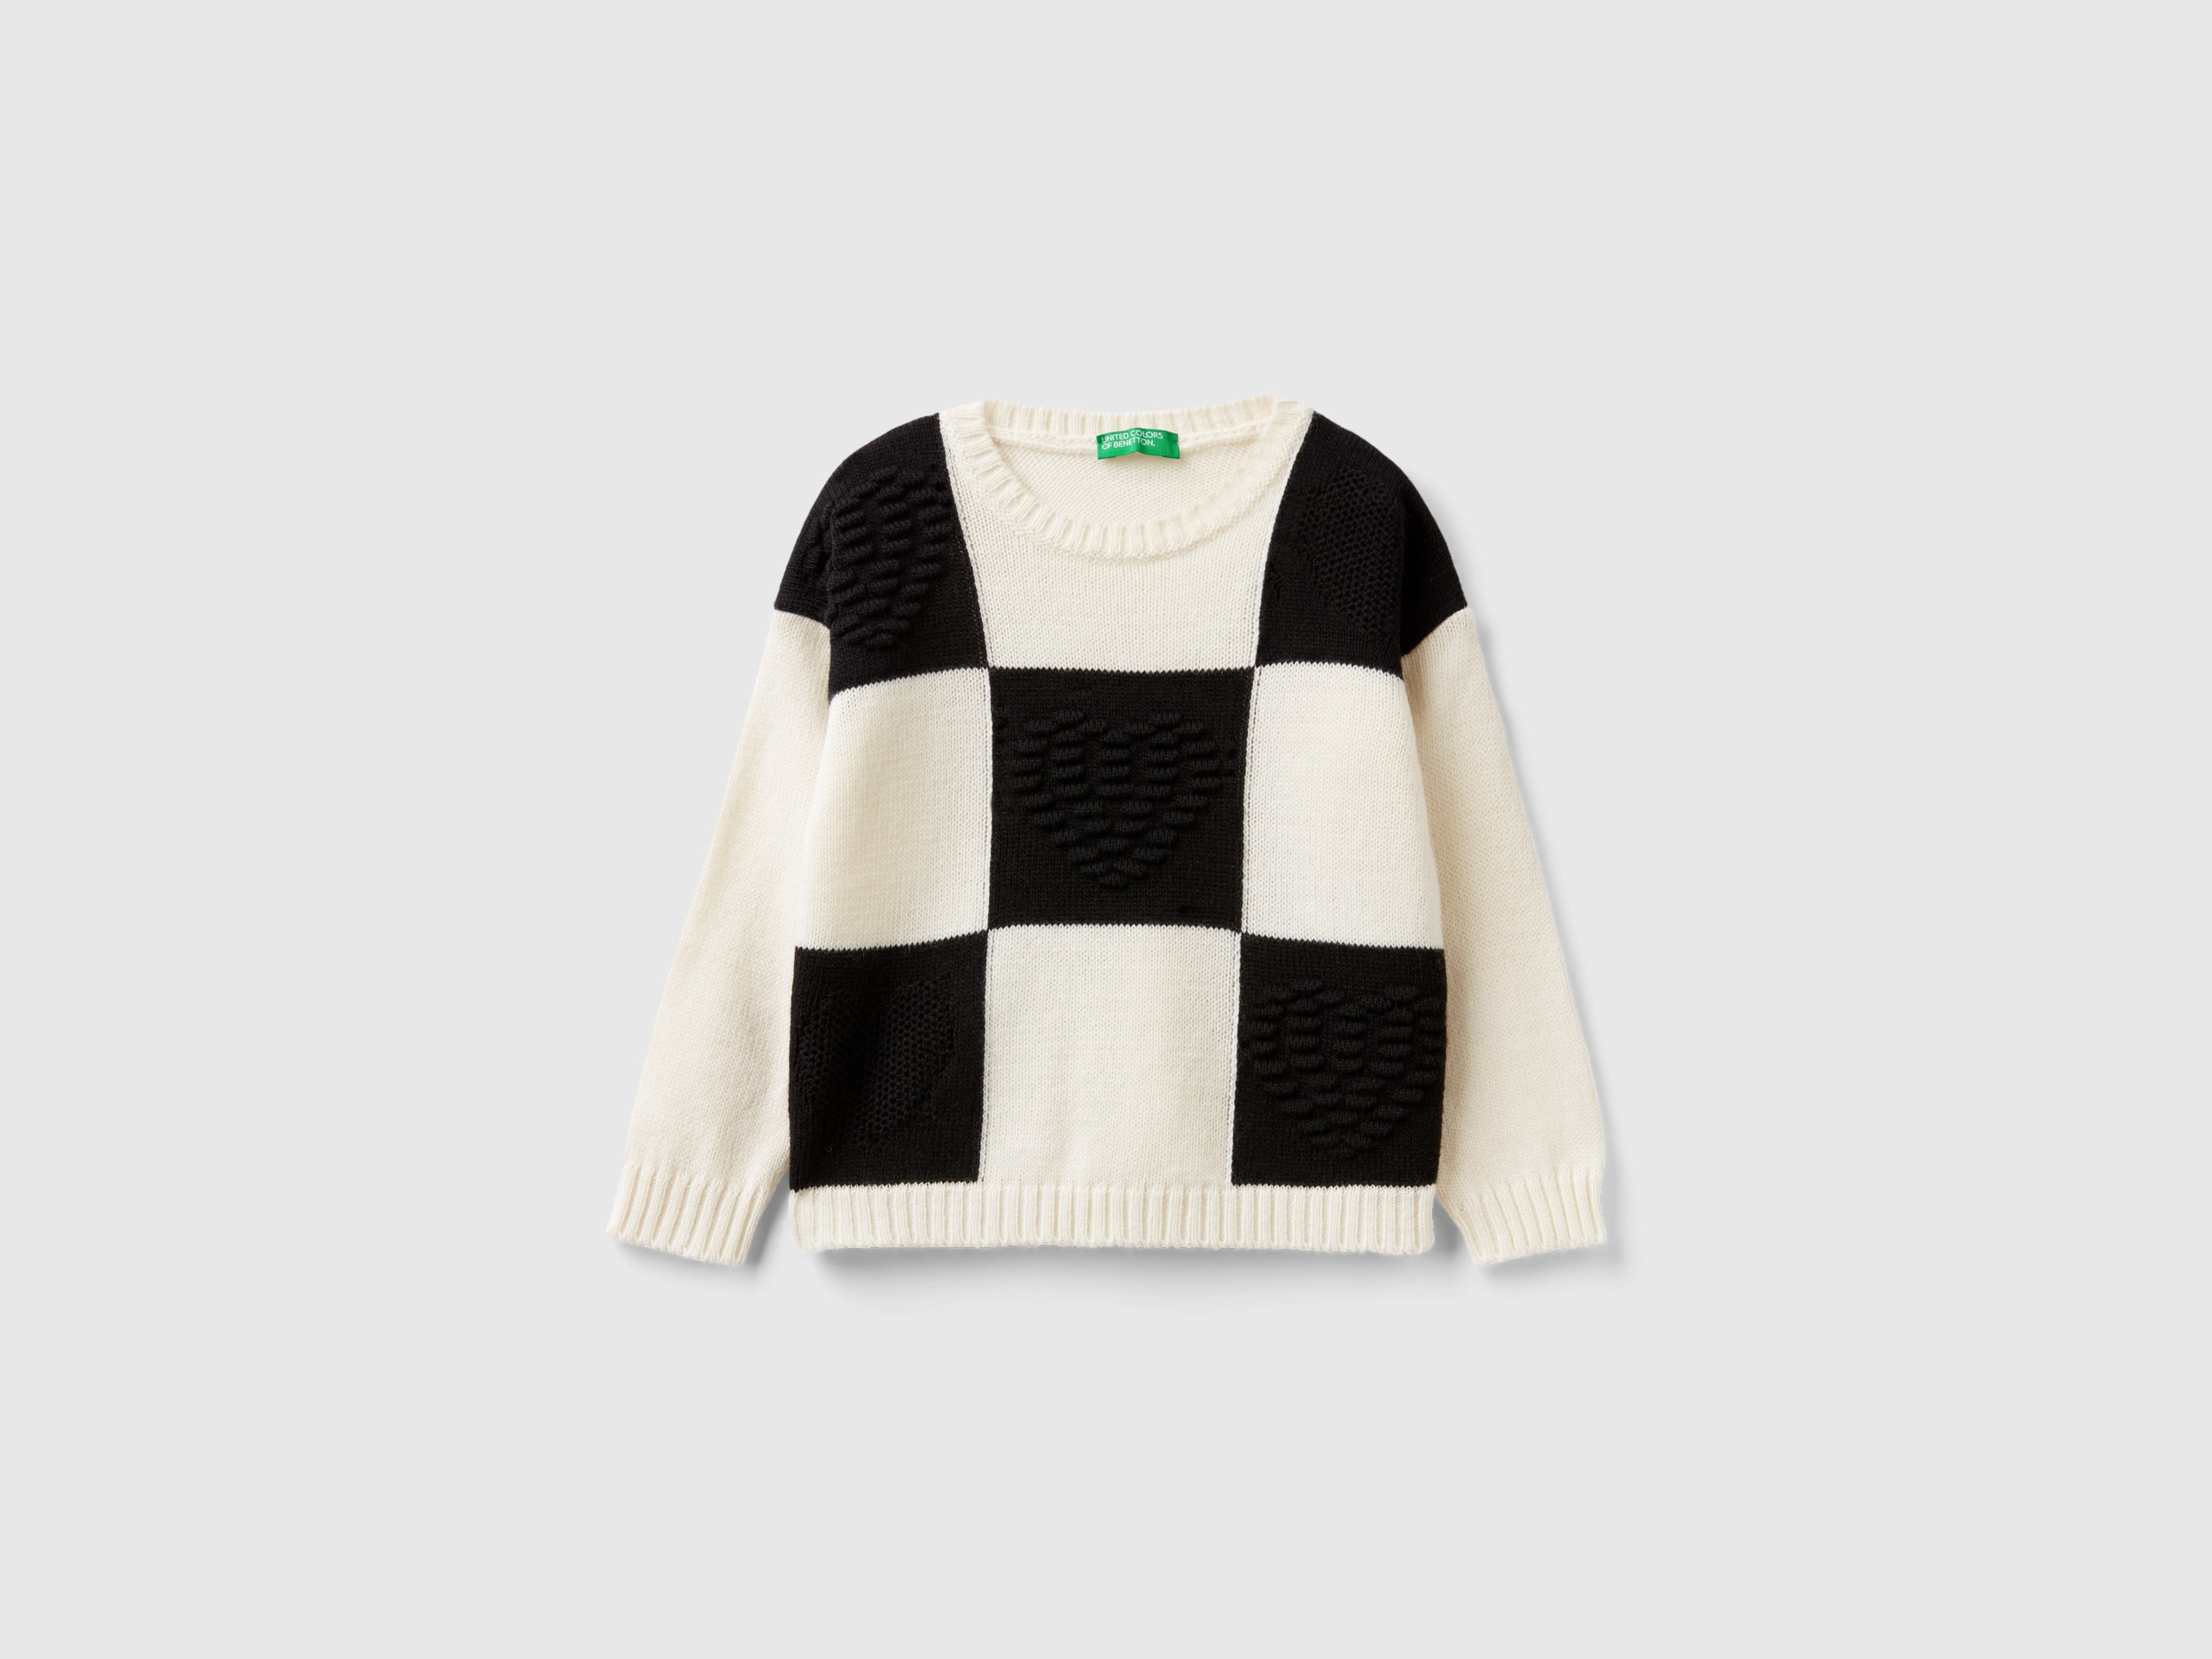 Benetton, Checkered Sweater With Hearts, size 5-6, Creamy White, Kids